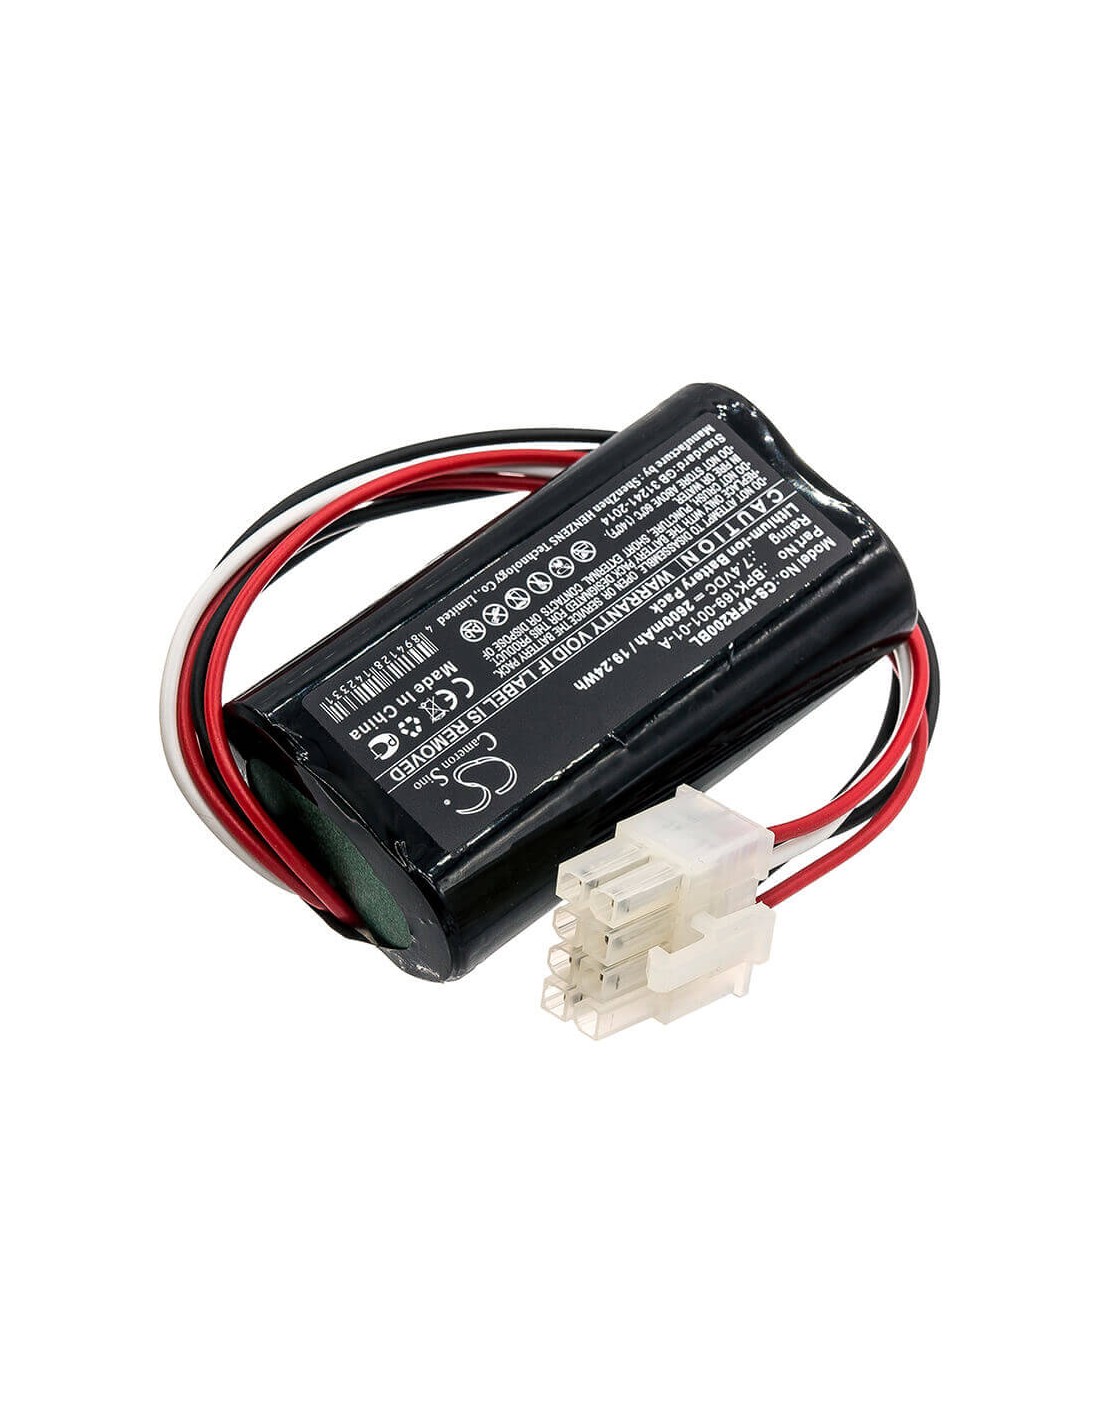 fits Part Number BPK169-001-01-A Payment Terminal Cameron Sino CS-VFR200BL 7.4V Li-ion 2600mAh/19.24Wh Ruby CI Replacement Battery for Ruby 2 PCA169-404-01-A PCA169-001-01 BPK182-001 